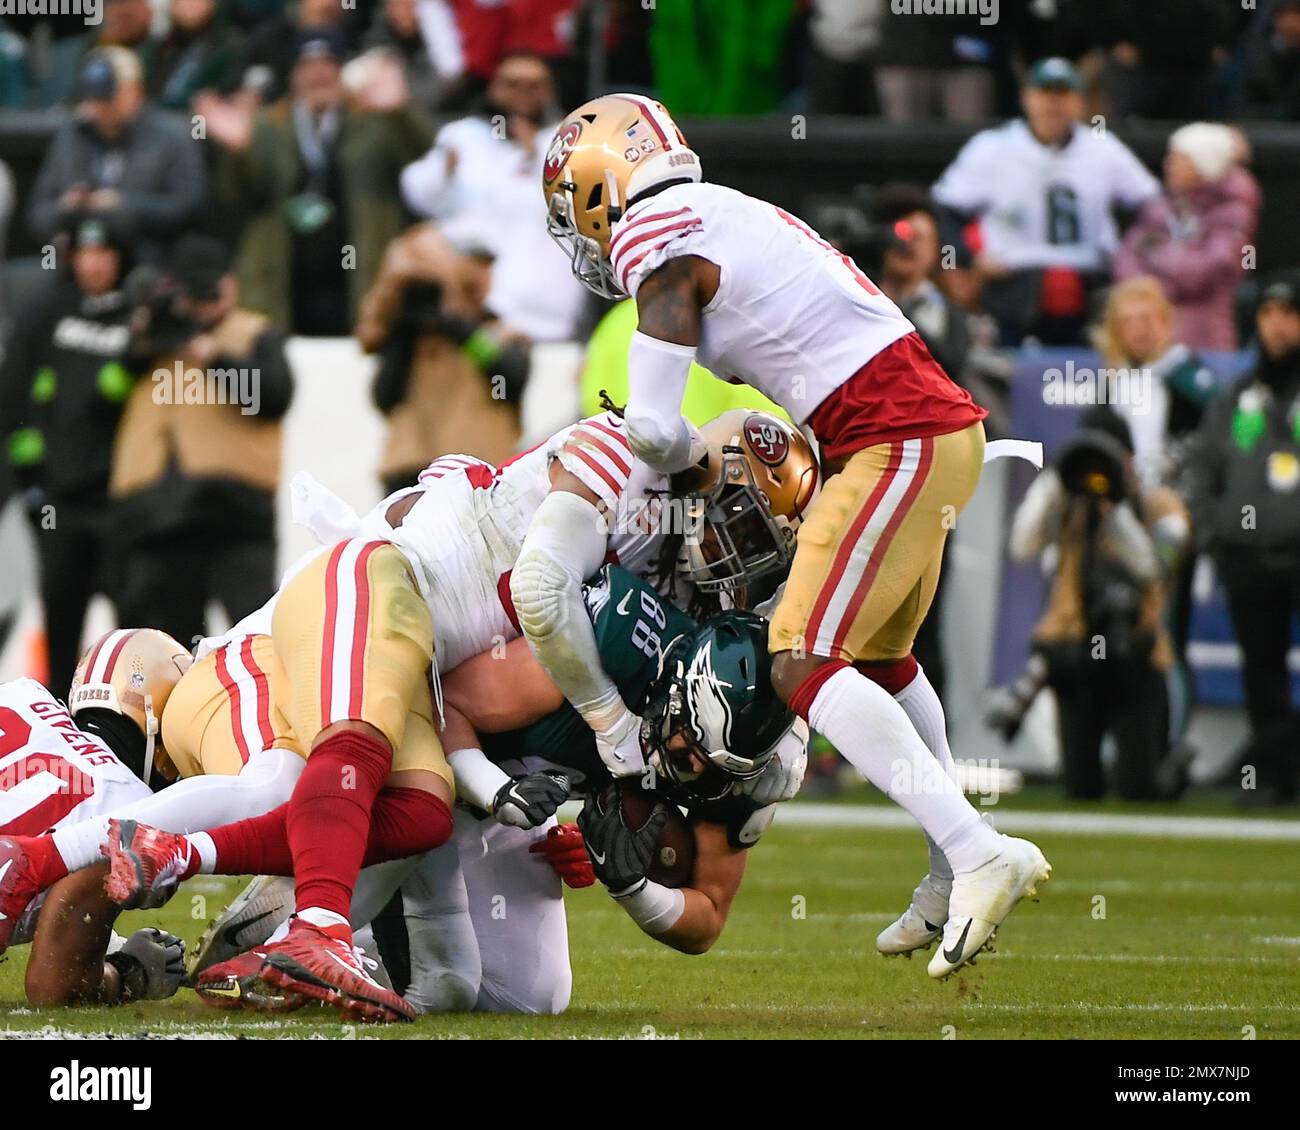 Philadelphia, Pennsylvania, USA. 29th Jan, 2023. Pennsylvania, USA; Philadelphia Eagles tight end Dallas Goedert (88) is dragged to the turf by the San Francisco 49ers defense during the first half of the NFC Championship in Philadelphia, Pennsylvania. Mandatory Credit Eric Canha/CSM/Alamy Live News Stock Photo